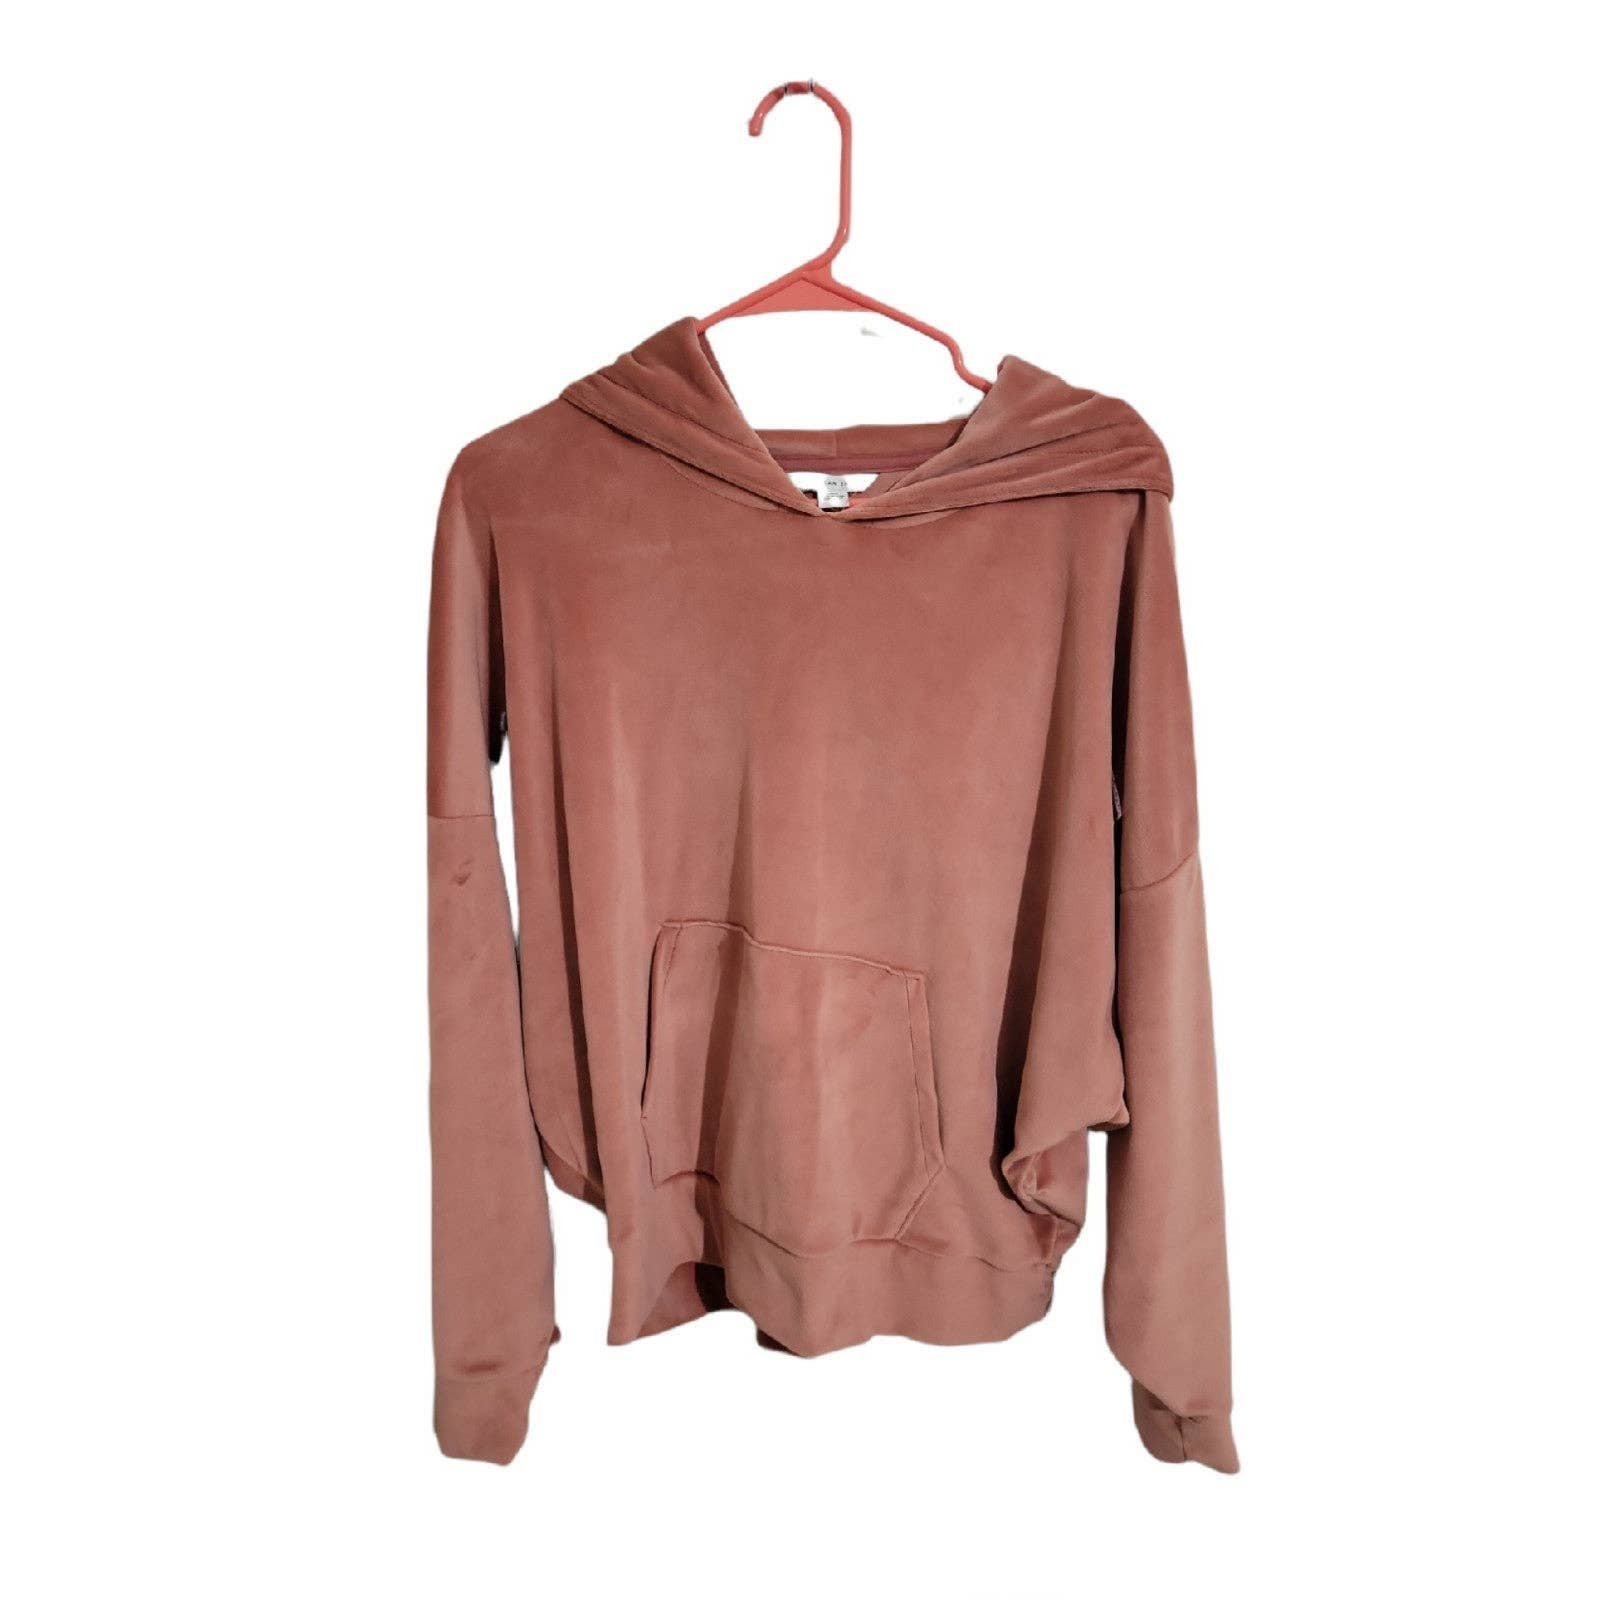 high discount American Eagle cropped velour sweatshirt kf3zventO outlet online shop